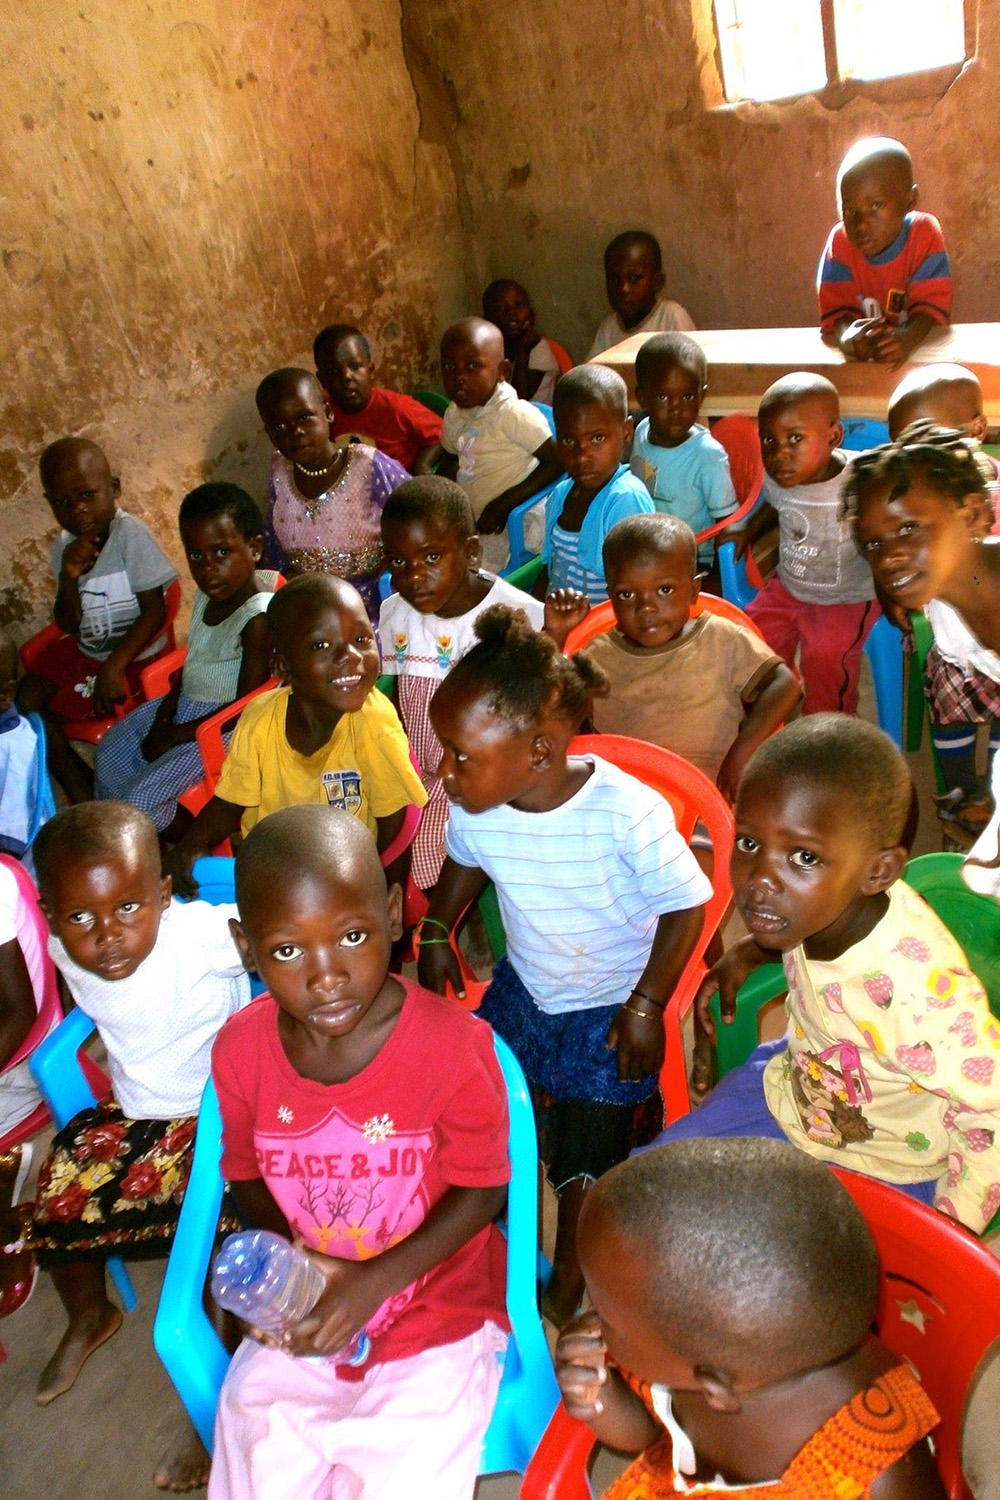 Classroom - Sponsor a child’s education in Africa - Chances for Children